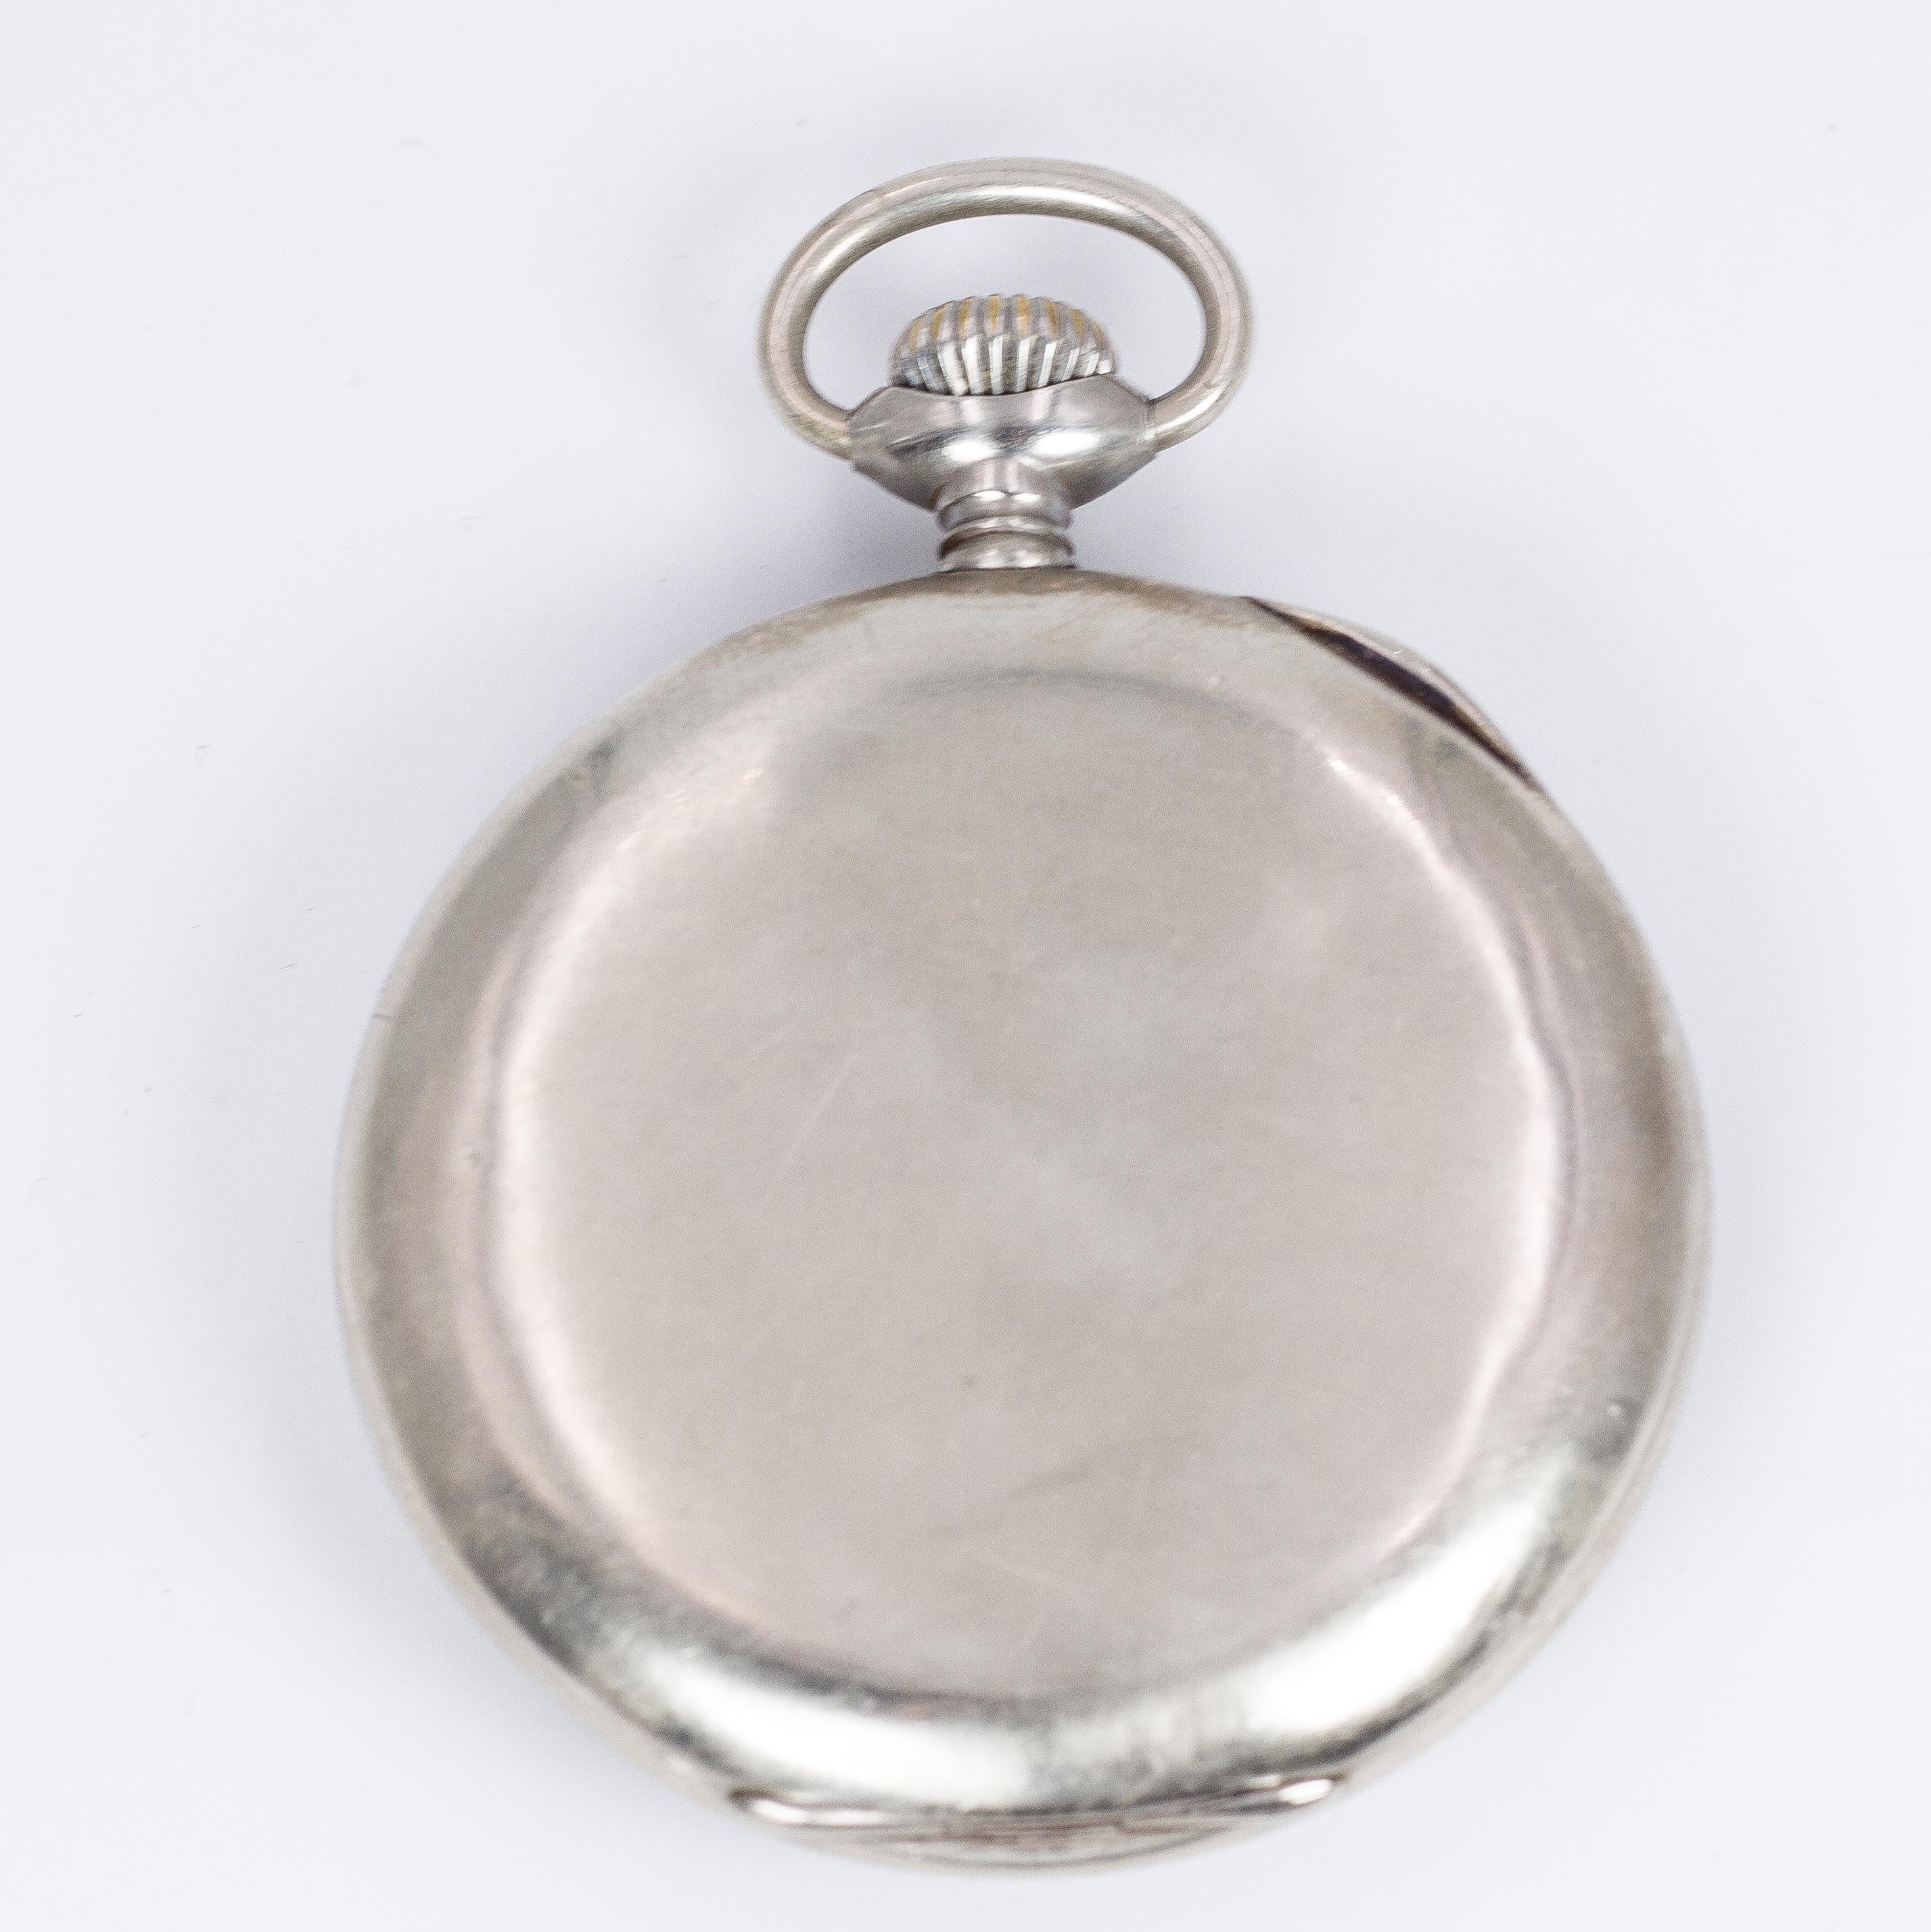 An antique Zenith pocket watch, dating from the early 20th Century. 

BRAND
Zenith

MATERIALS
Metal

MEASUREMENTS
Diameter: 49 mm